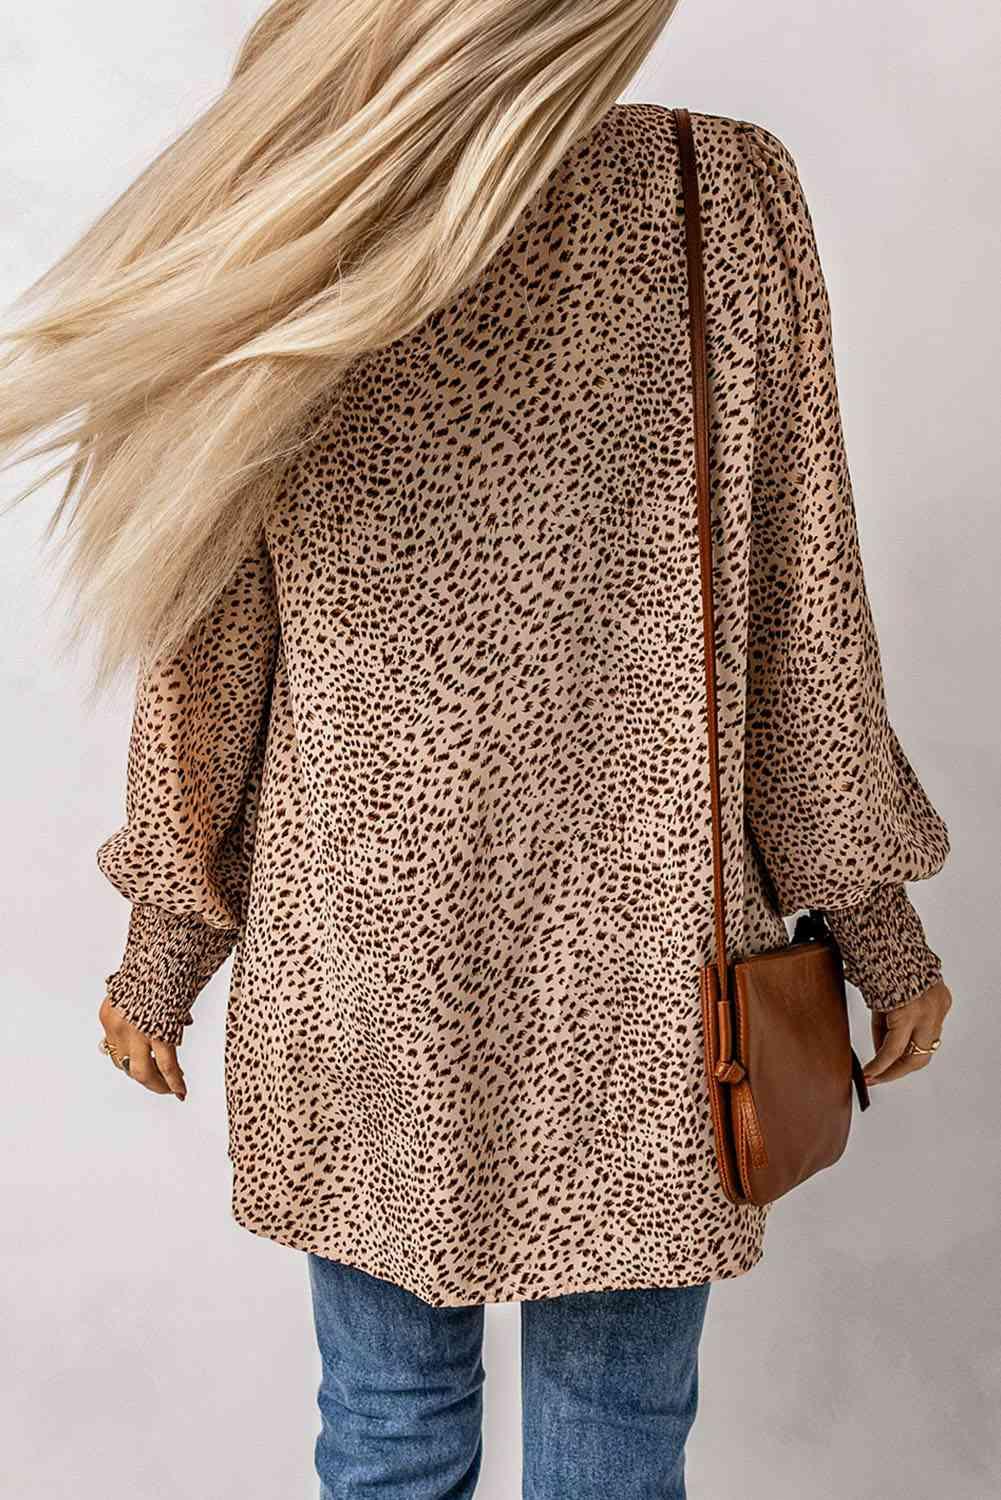 the back of a woman wearing a leopard print top